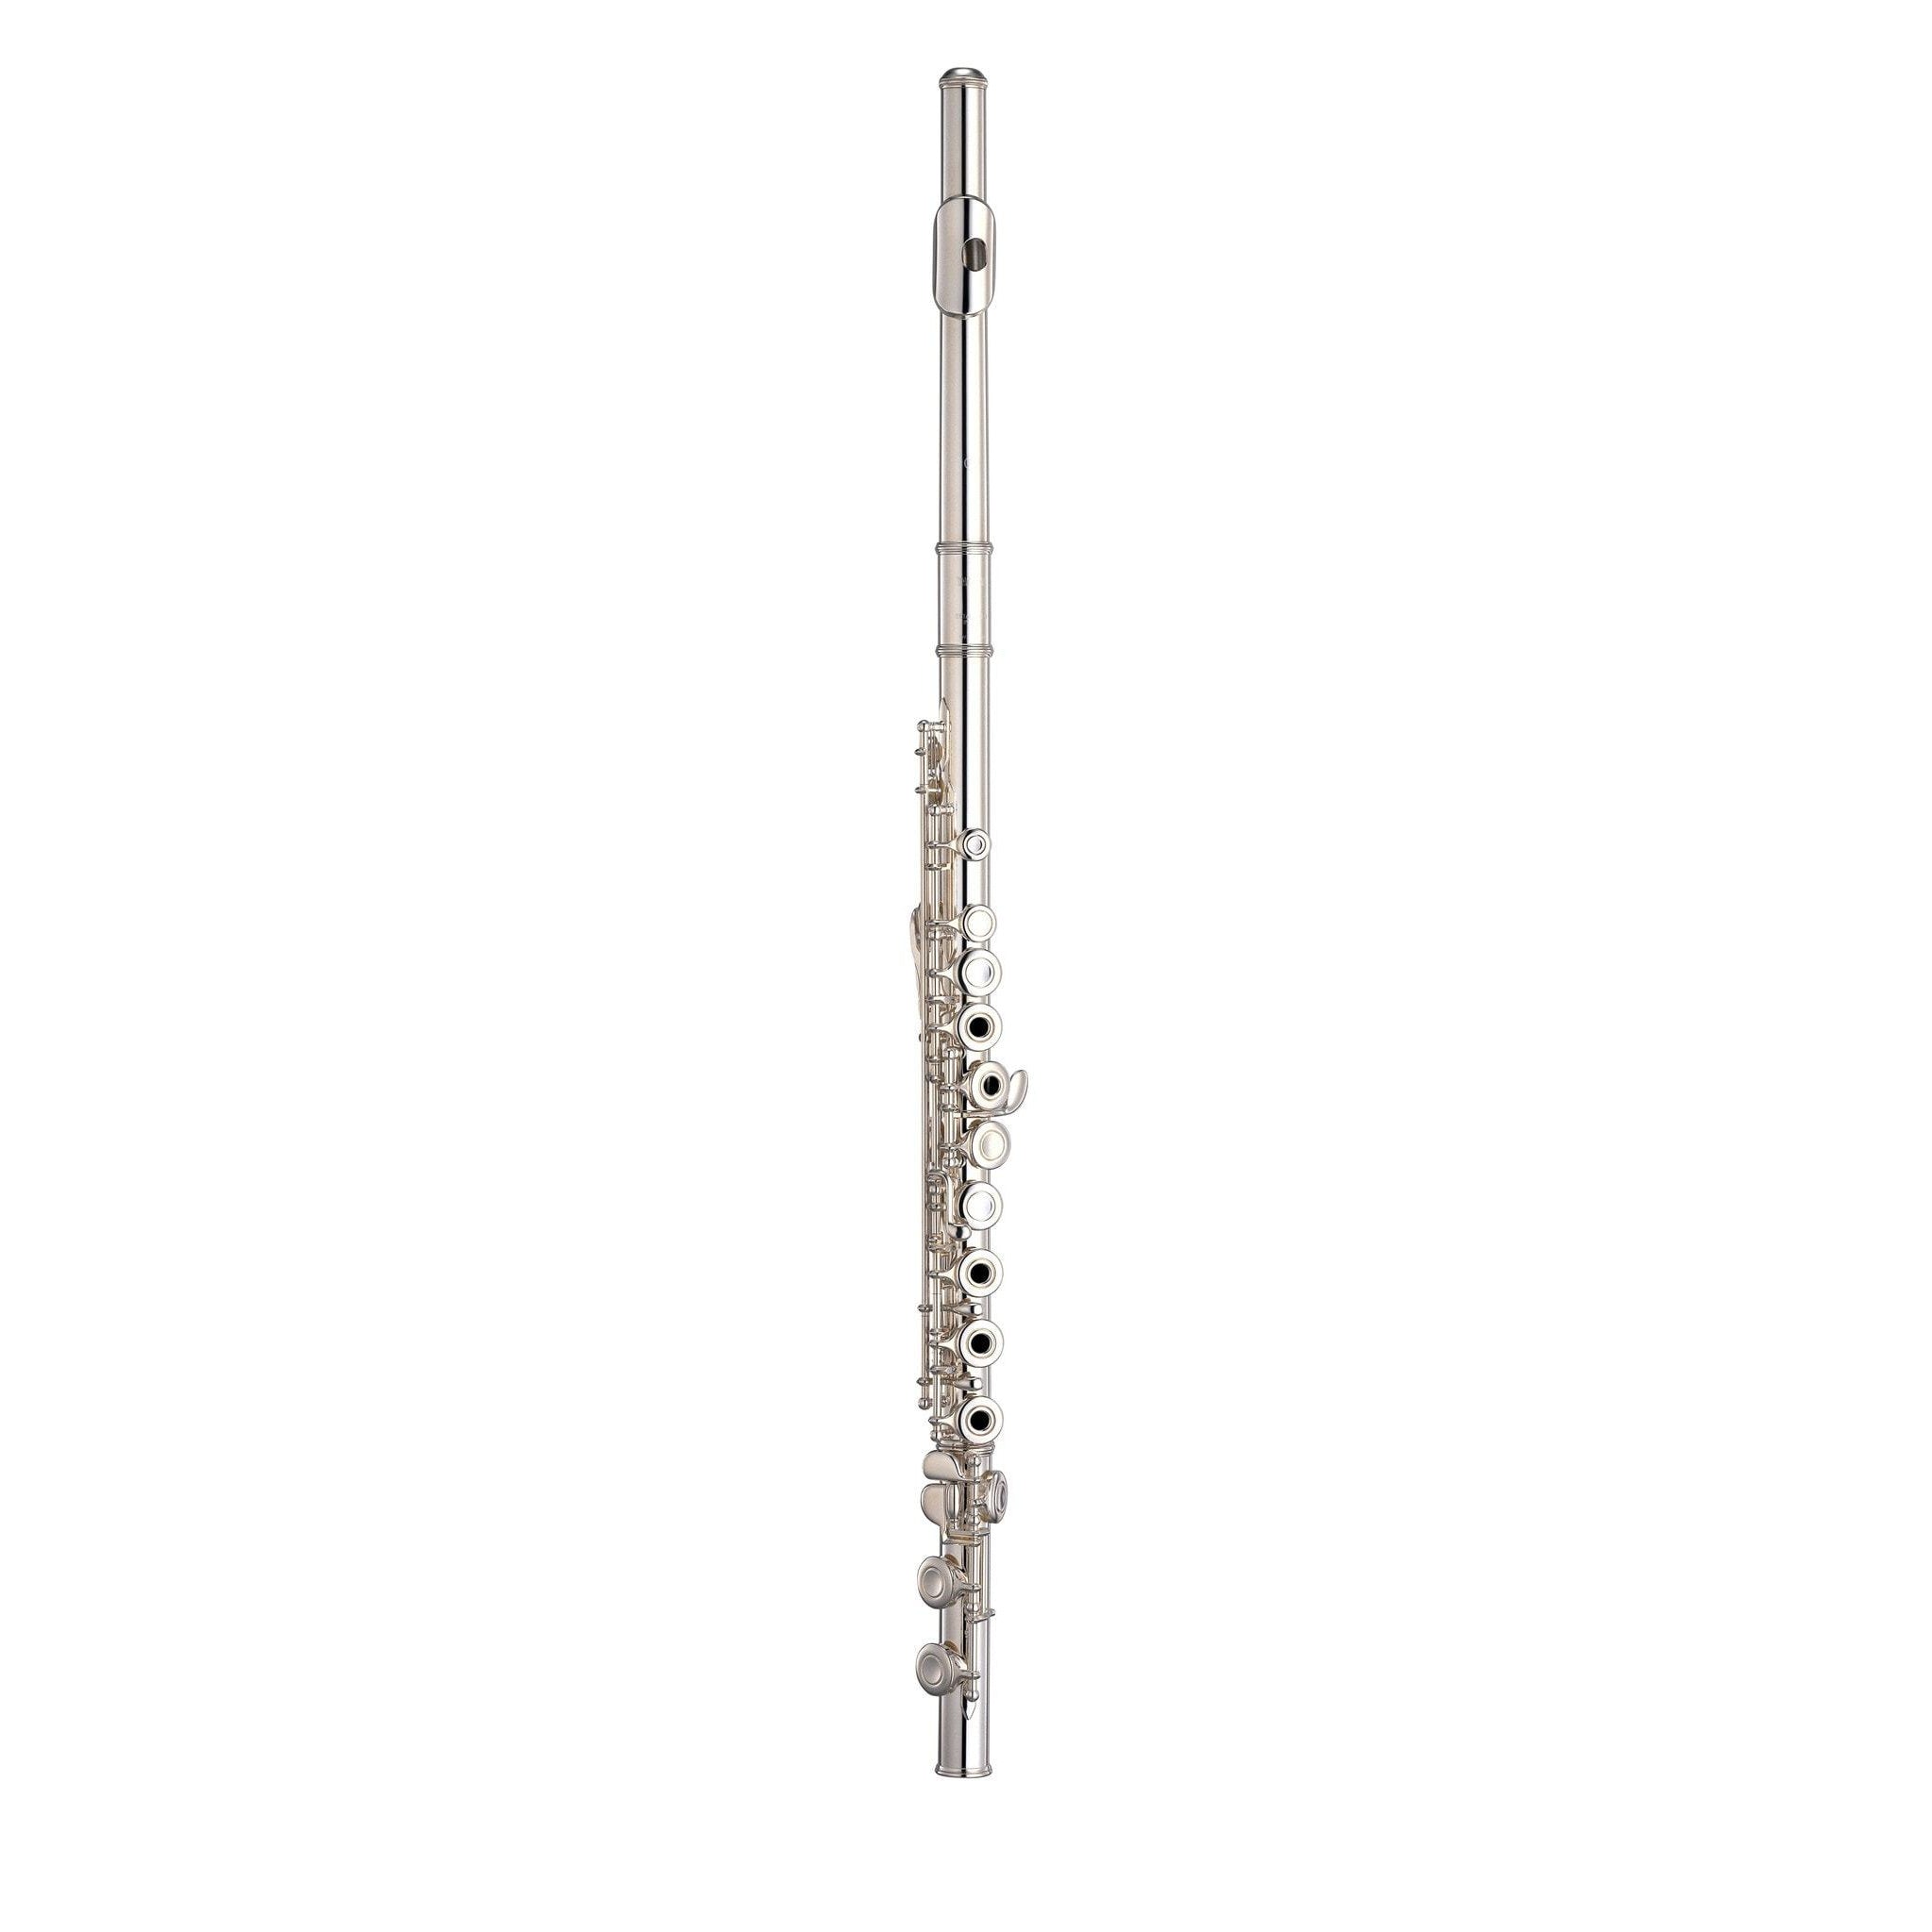 Yamaha YFL-462 Intermediate Series Flute YFL-462H - Includes B Footjoint with gizmo key and FLC-48II case and FLB-400EH Cover